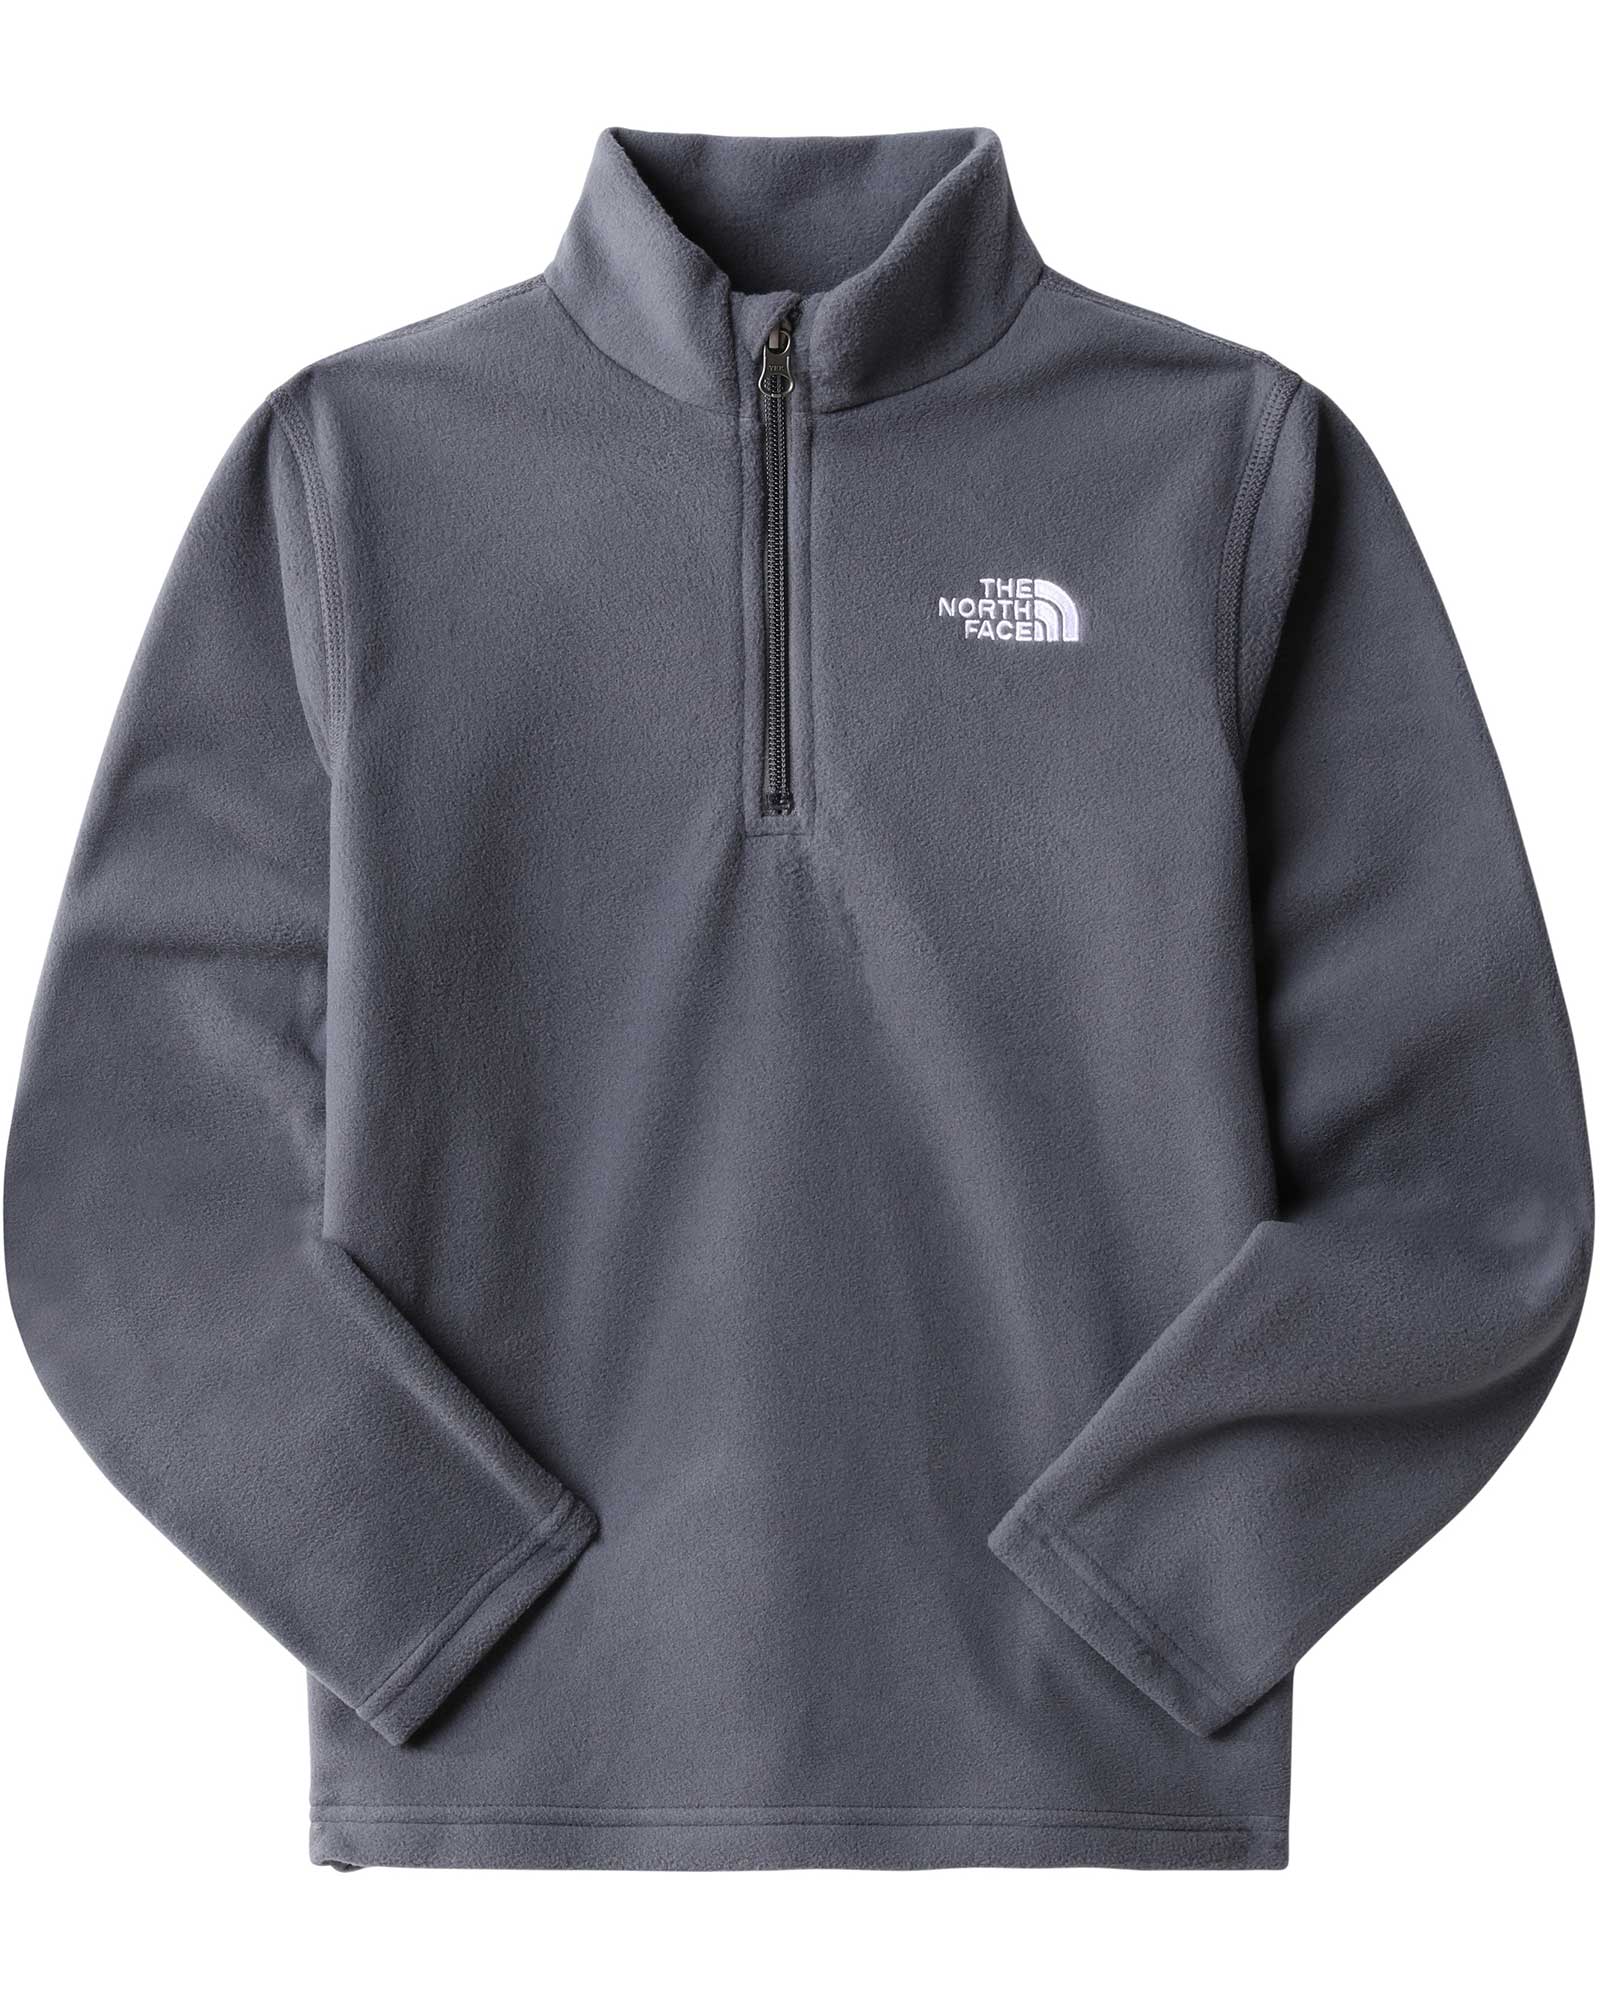 Product image of The North Face Glacier Kids' Zip Neck